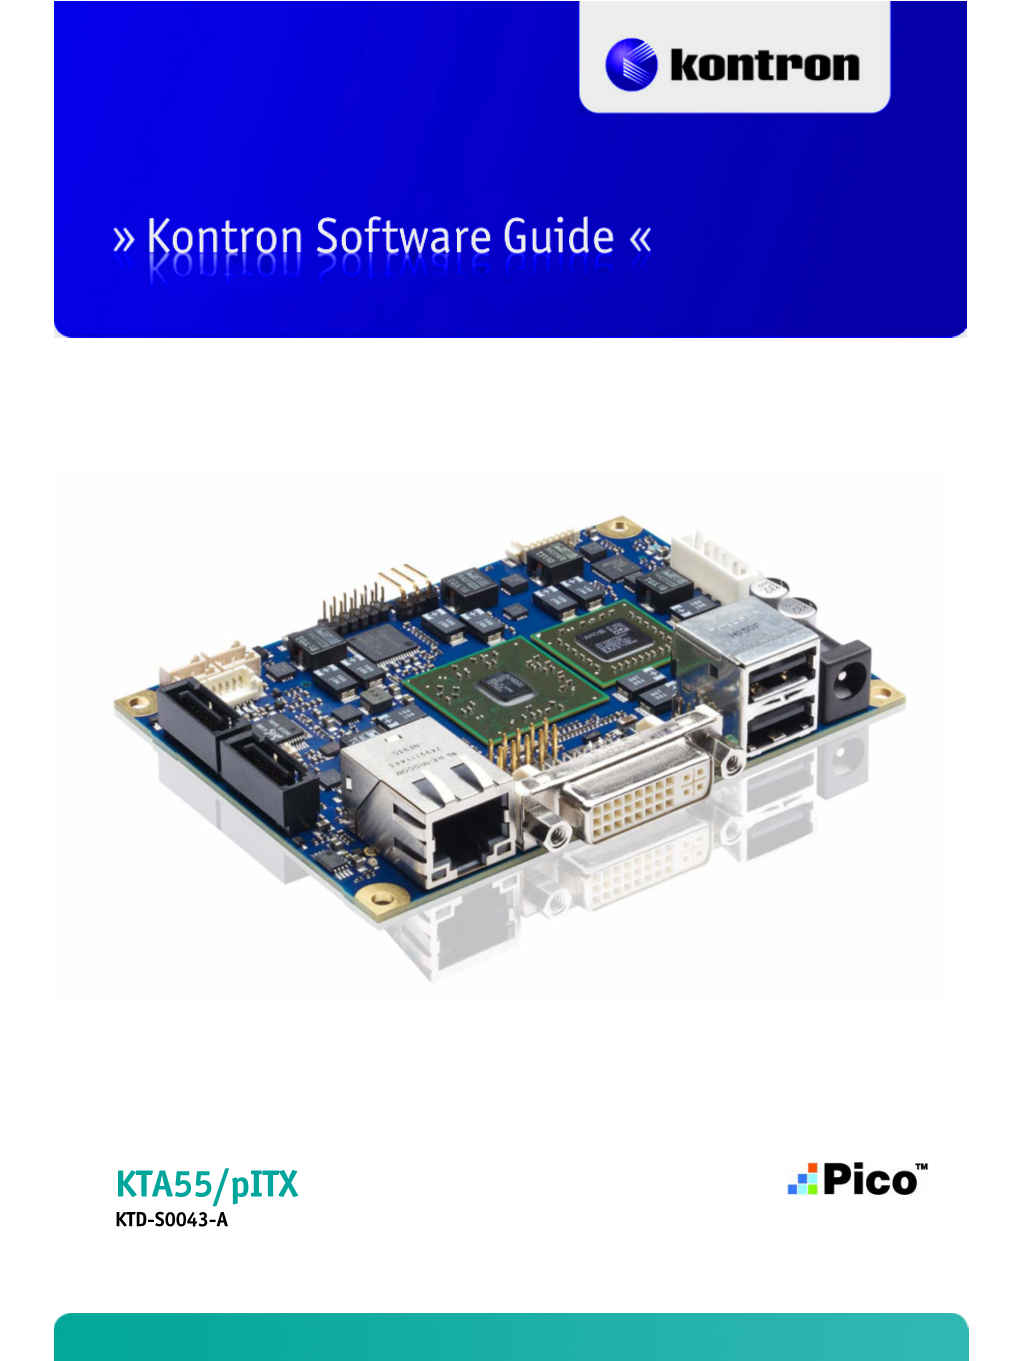 KTA55/Pitx Software Guide User Information Table of Contents